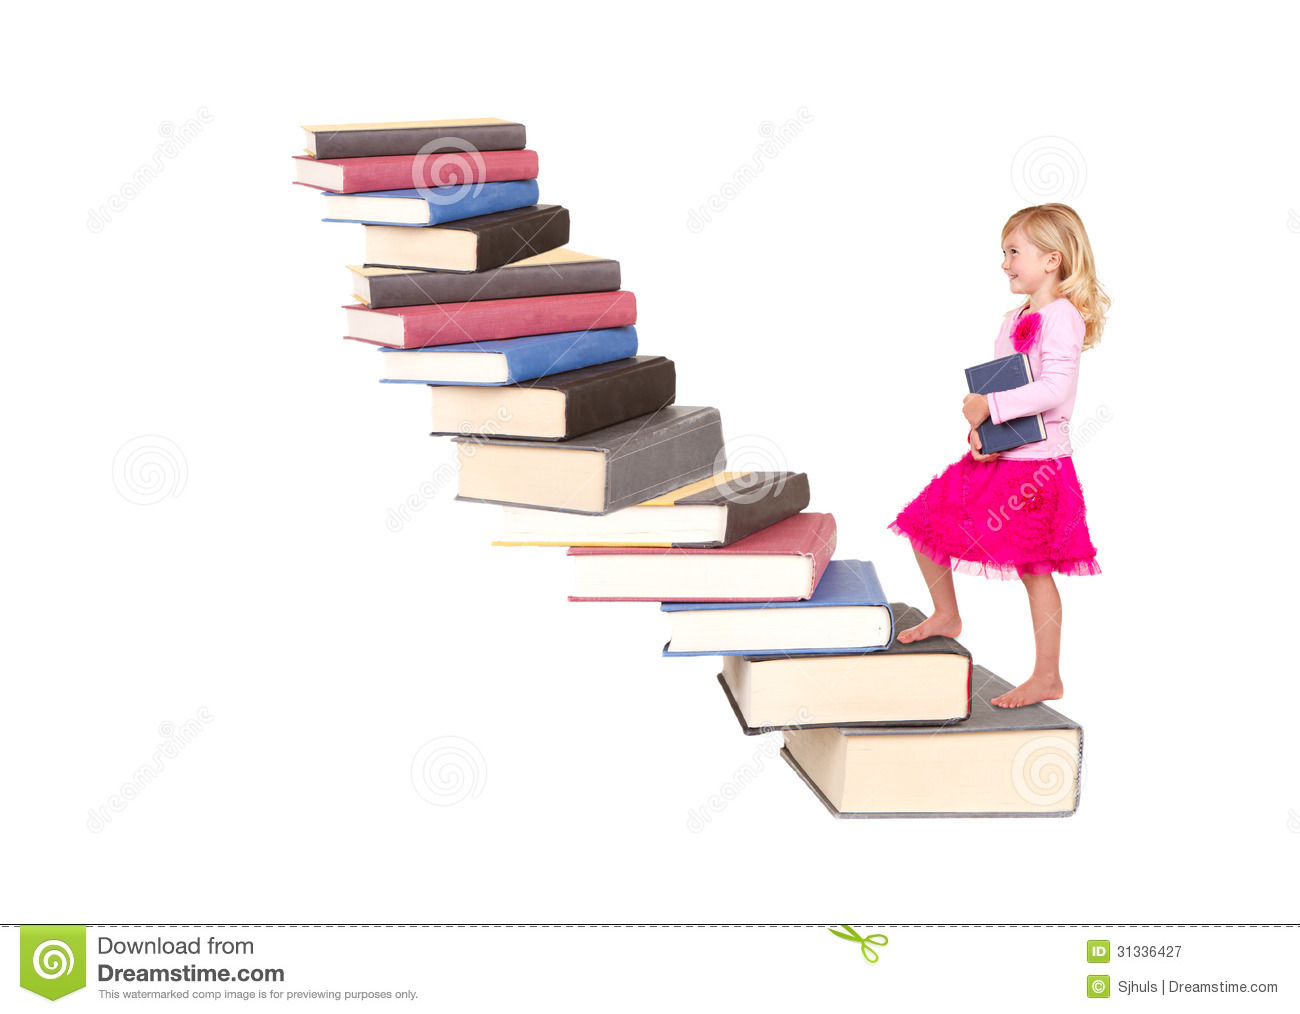 Child Climbing Staircase Of Books Royalty Free Stock Photography